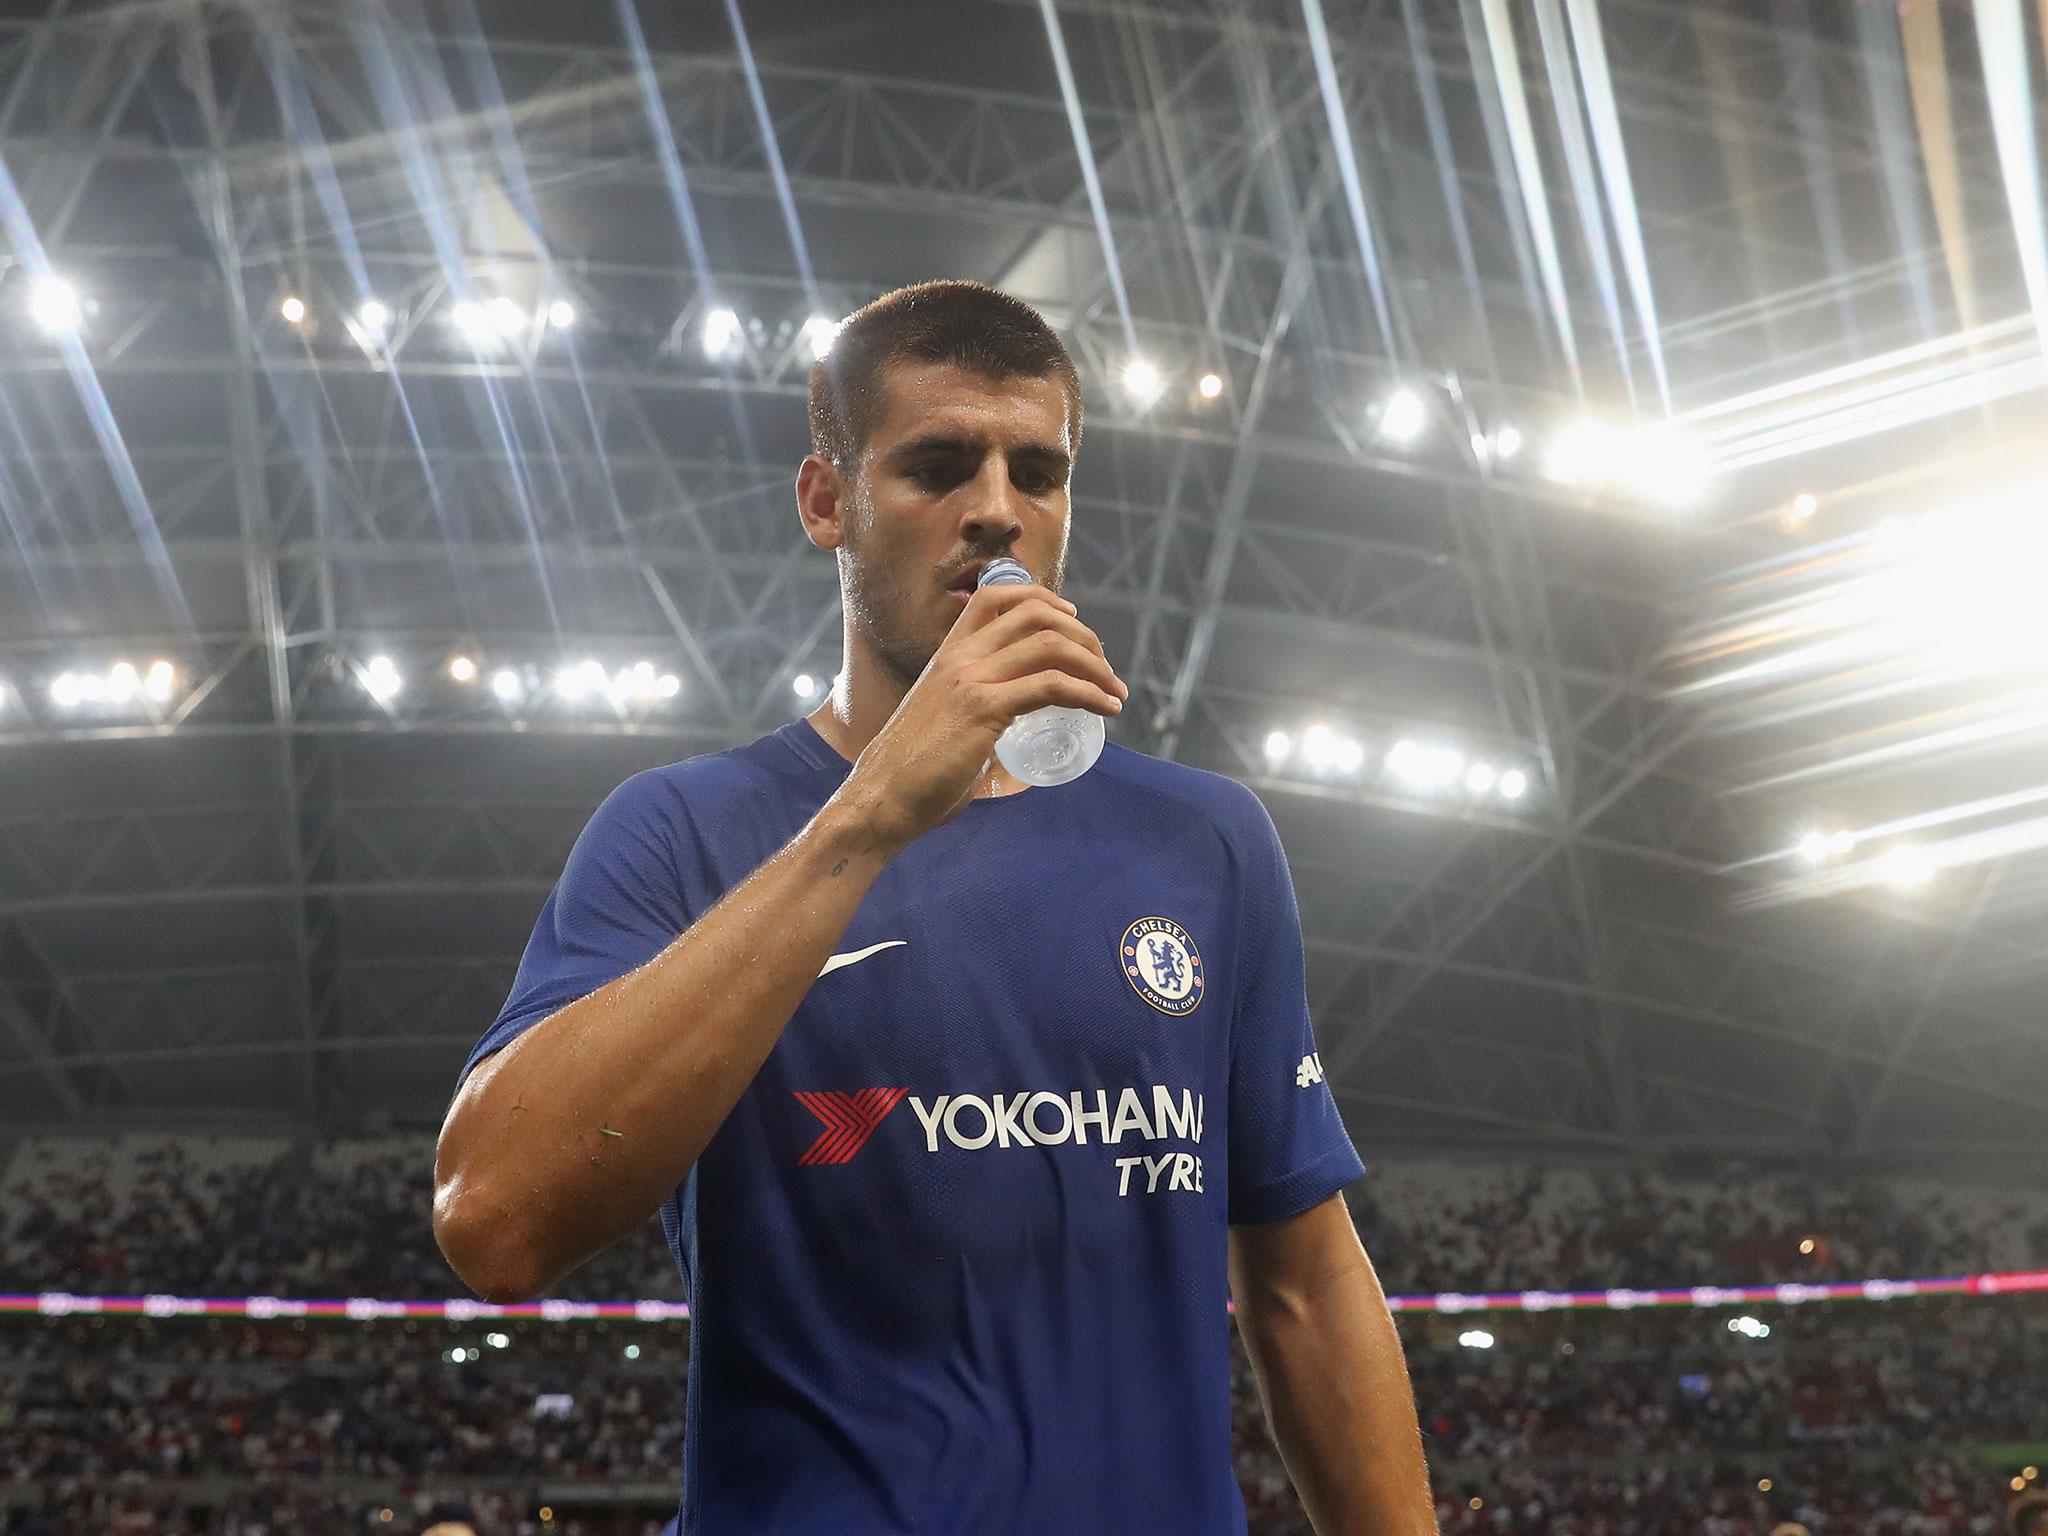 Alvaro Morata snatched an assist on his debut